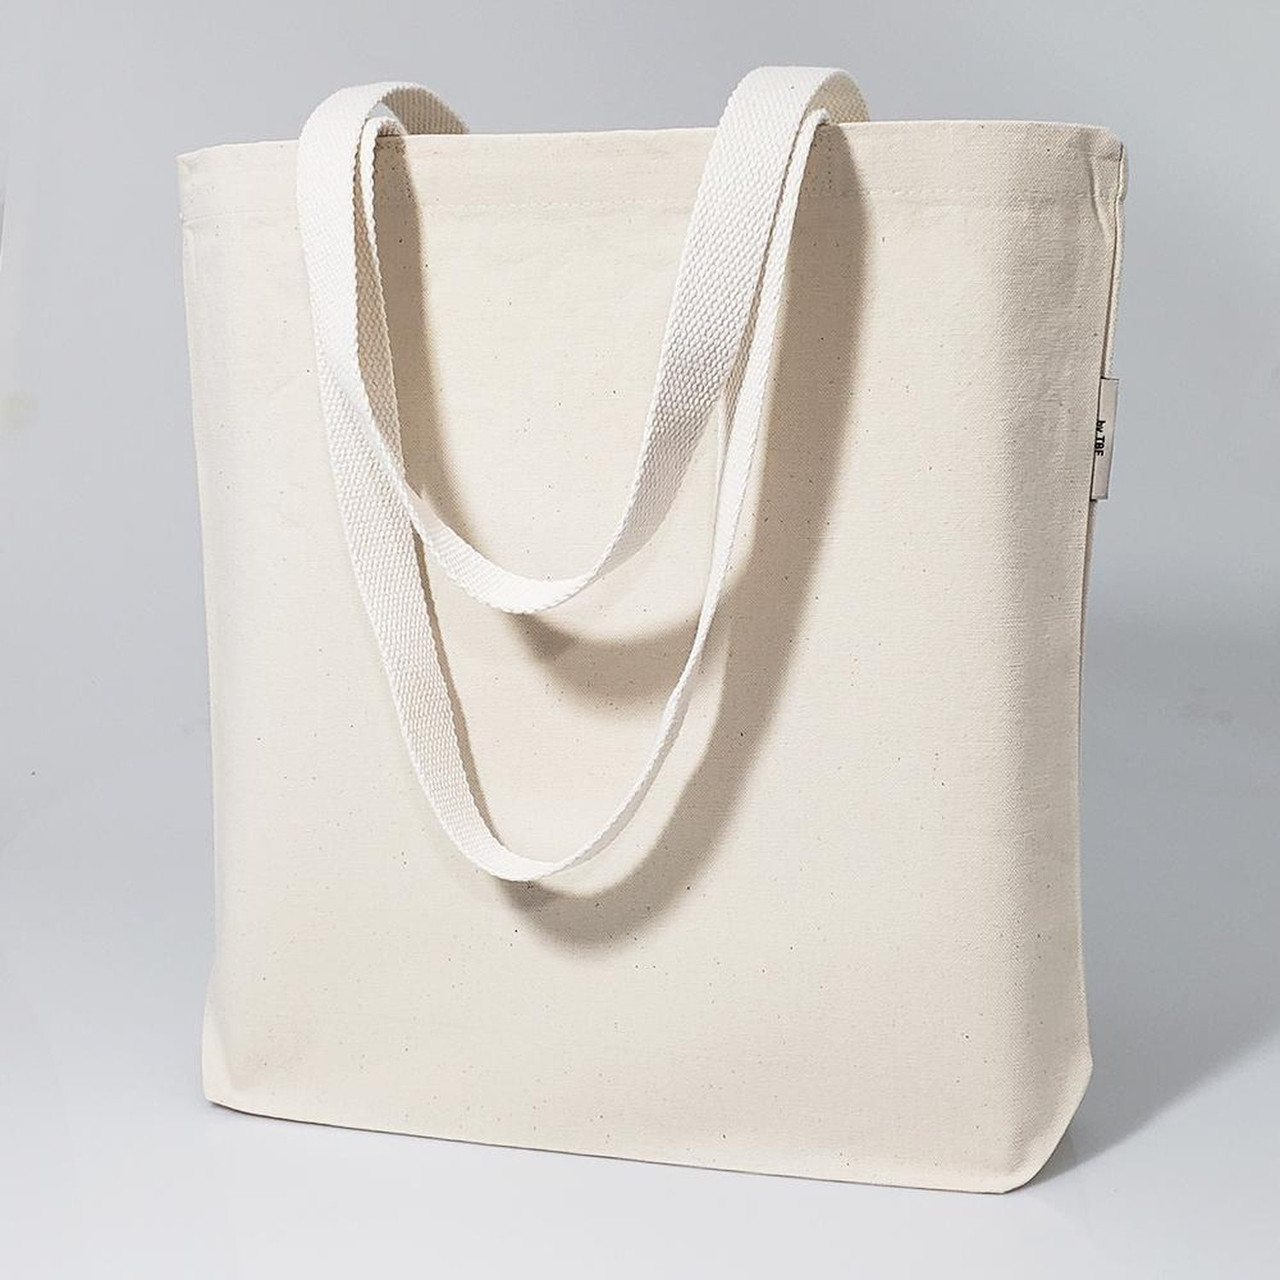 FERRY - Tote Bag : Bubbles - Buy Custom Handprinted Tote Bags Online by  Mapayah